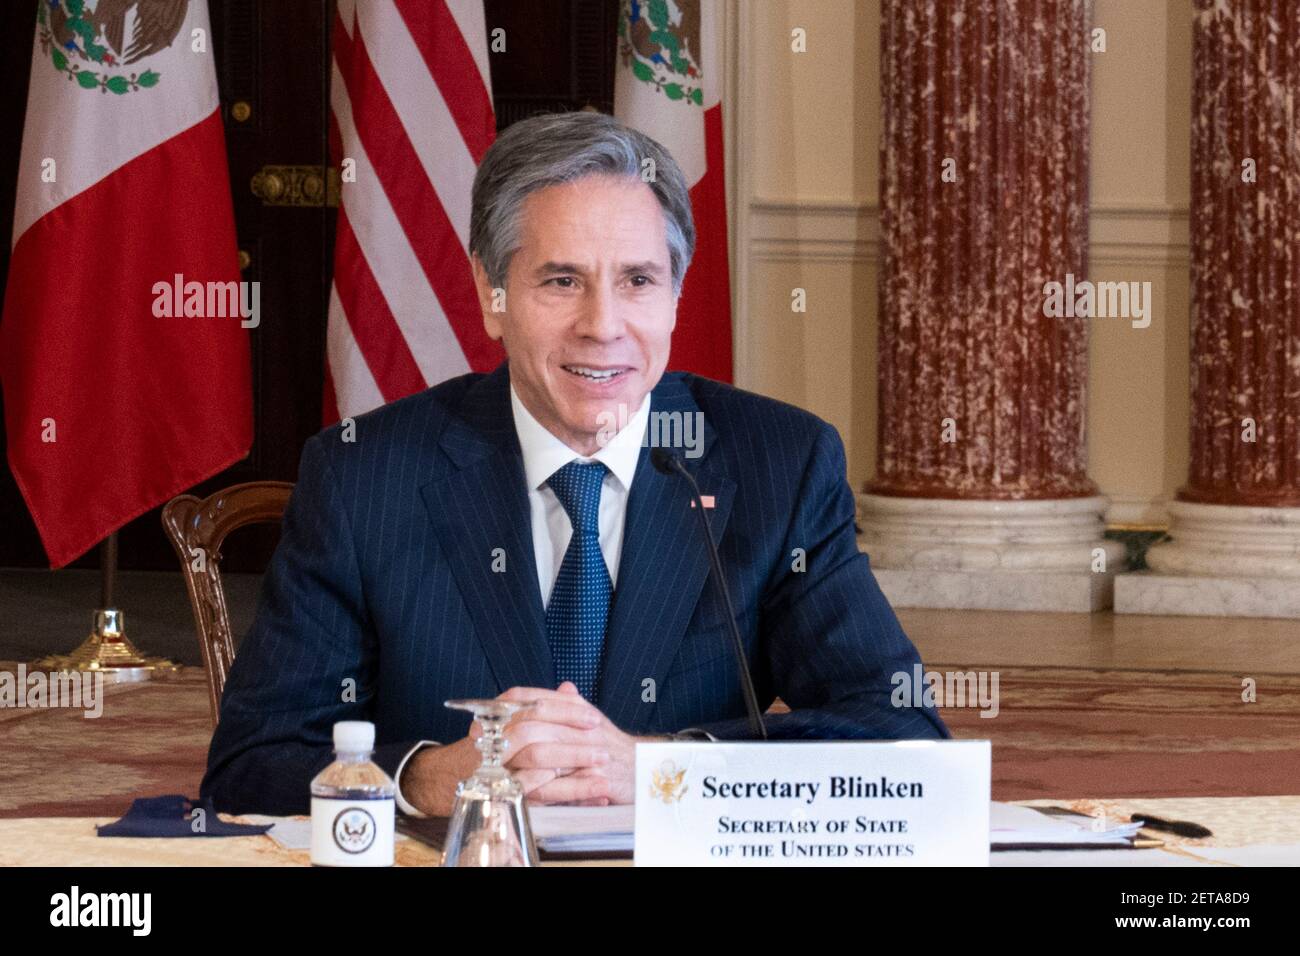 U.S. Secretary of State Antony Blinken meets virtually with Mexican Secretary of Economy Tatiana Clouthier from the Department of State Harry S. Truman Building February 26, 2021 in Washington, DC. Stock Photo